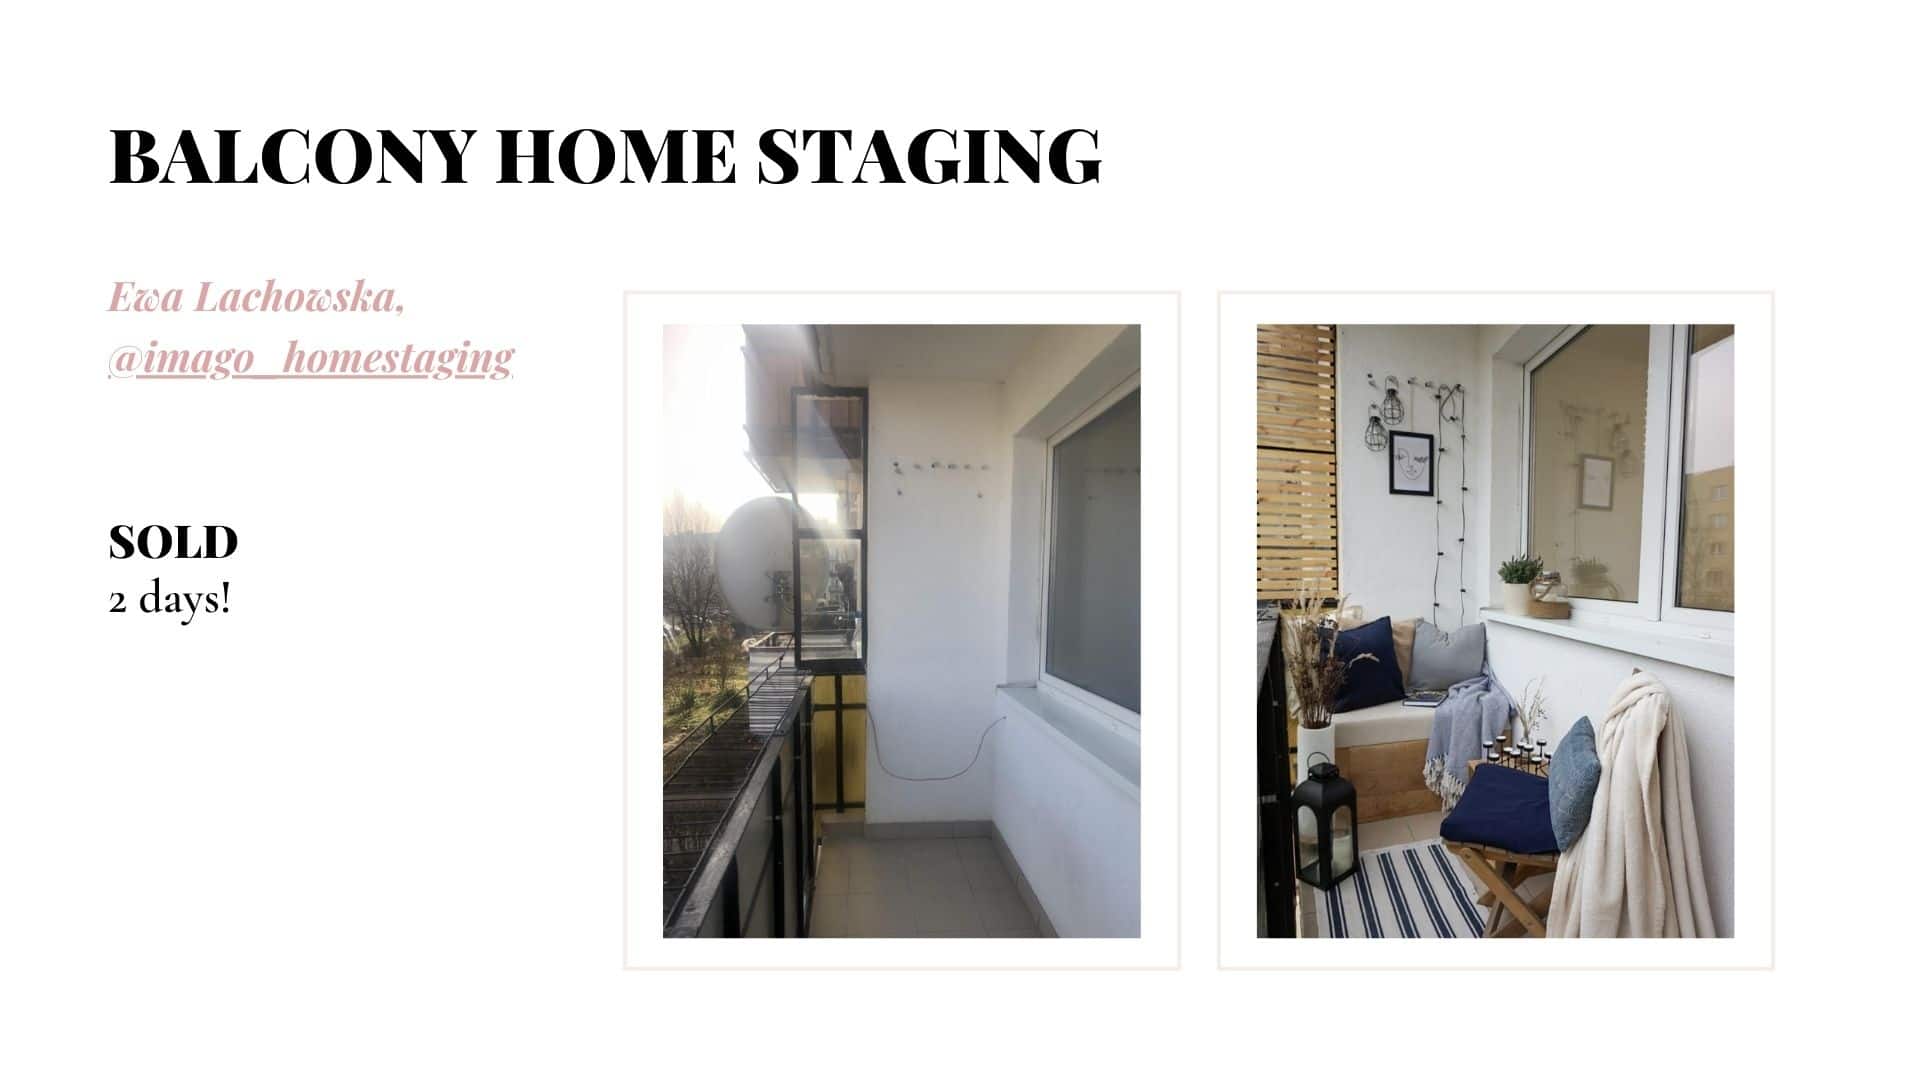 Balcony Home Staging Trends 2021